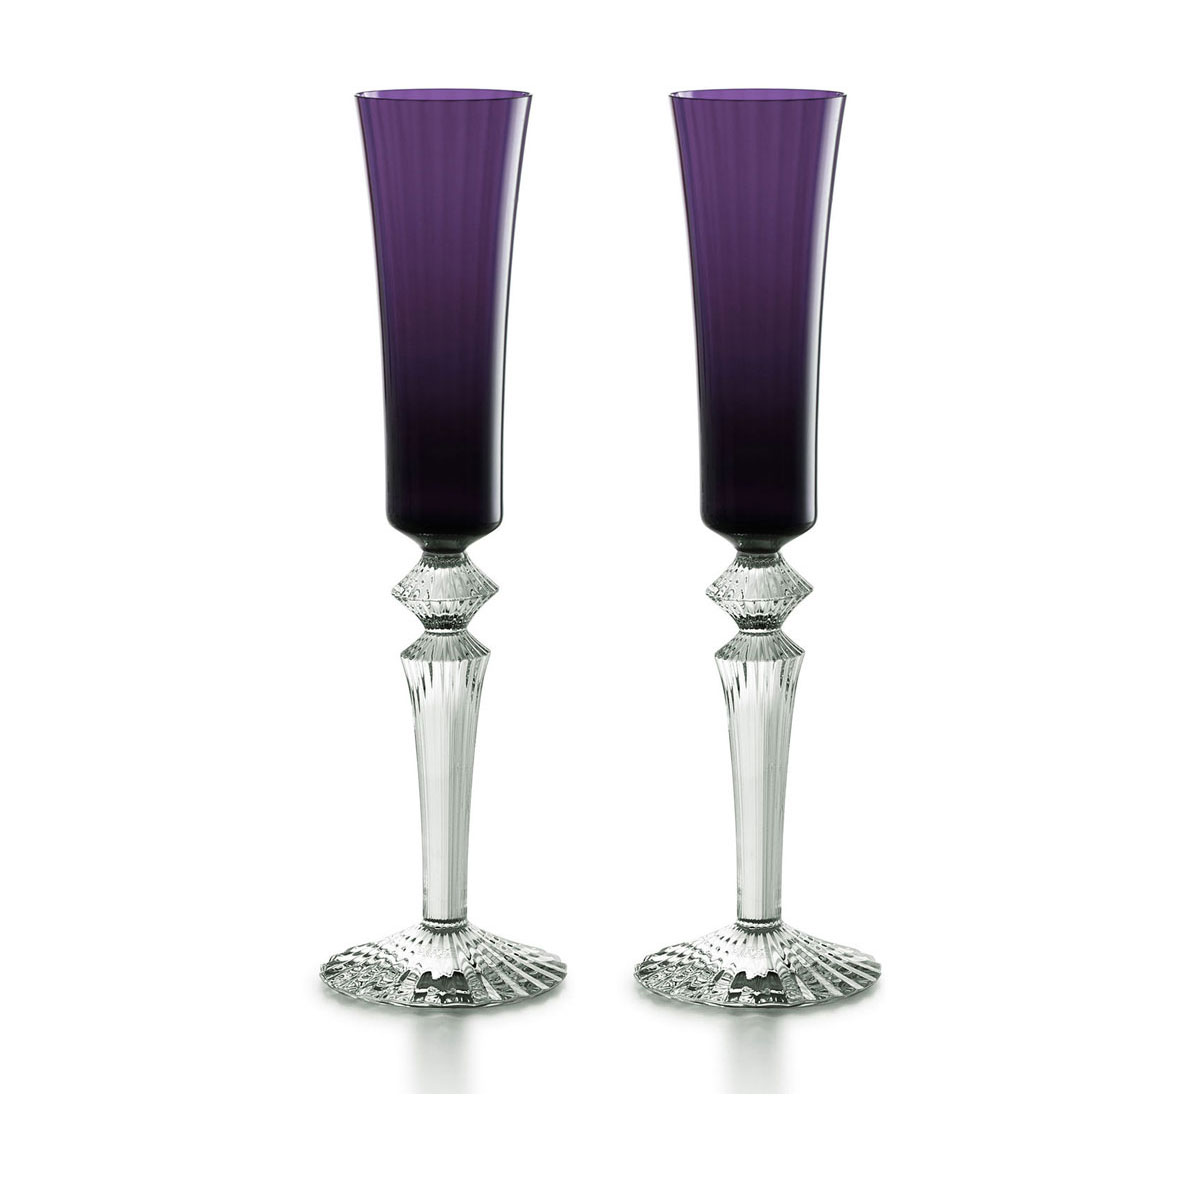 Baccarat Crystal, Mille Nuits Flutissimo Purple, Boxed, Pair